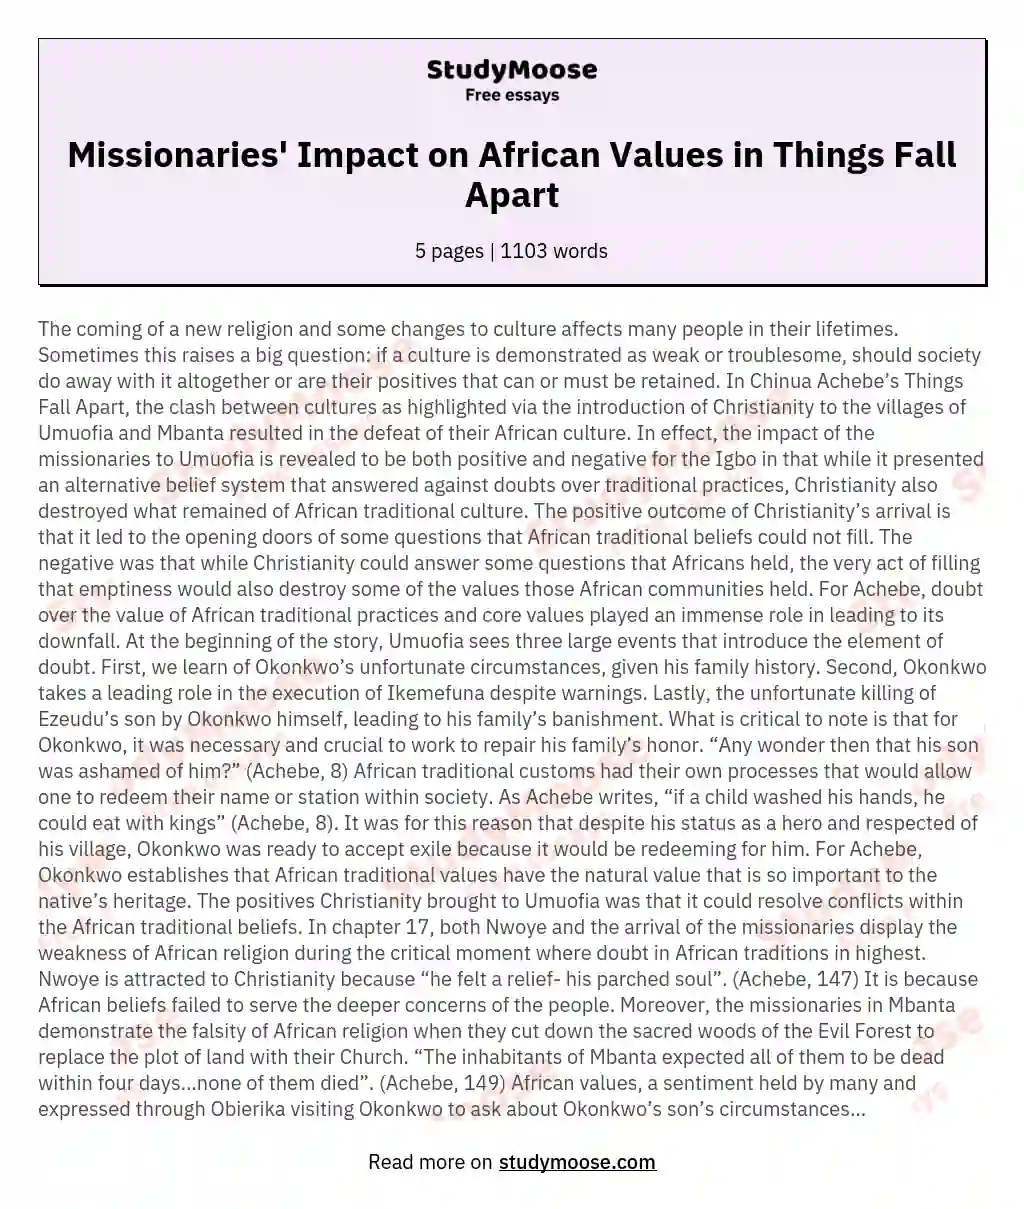 Missionaries' Impact on African Values in Things Fall Apart essay